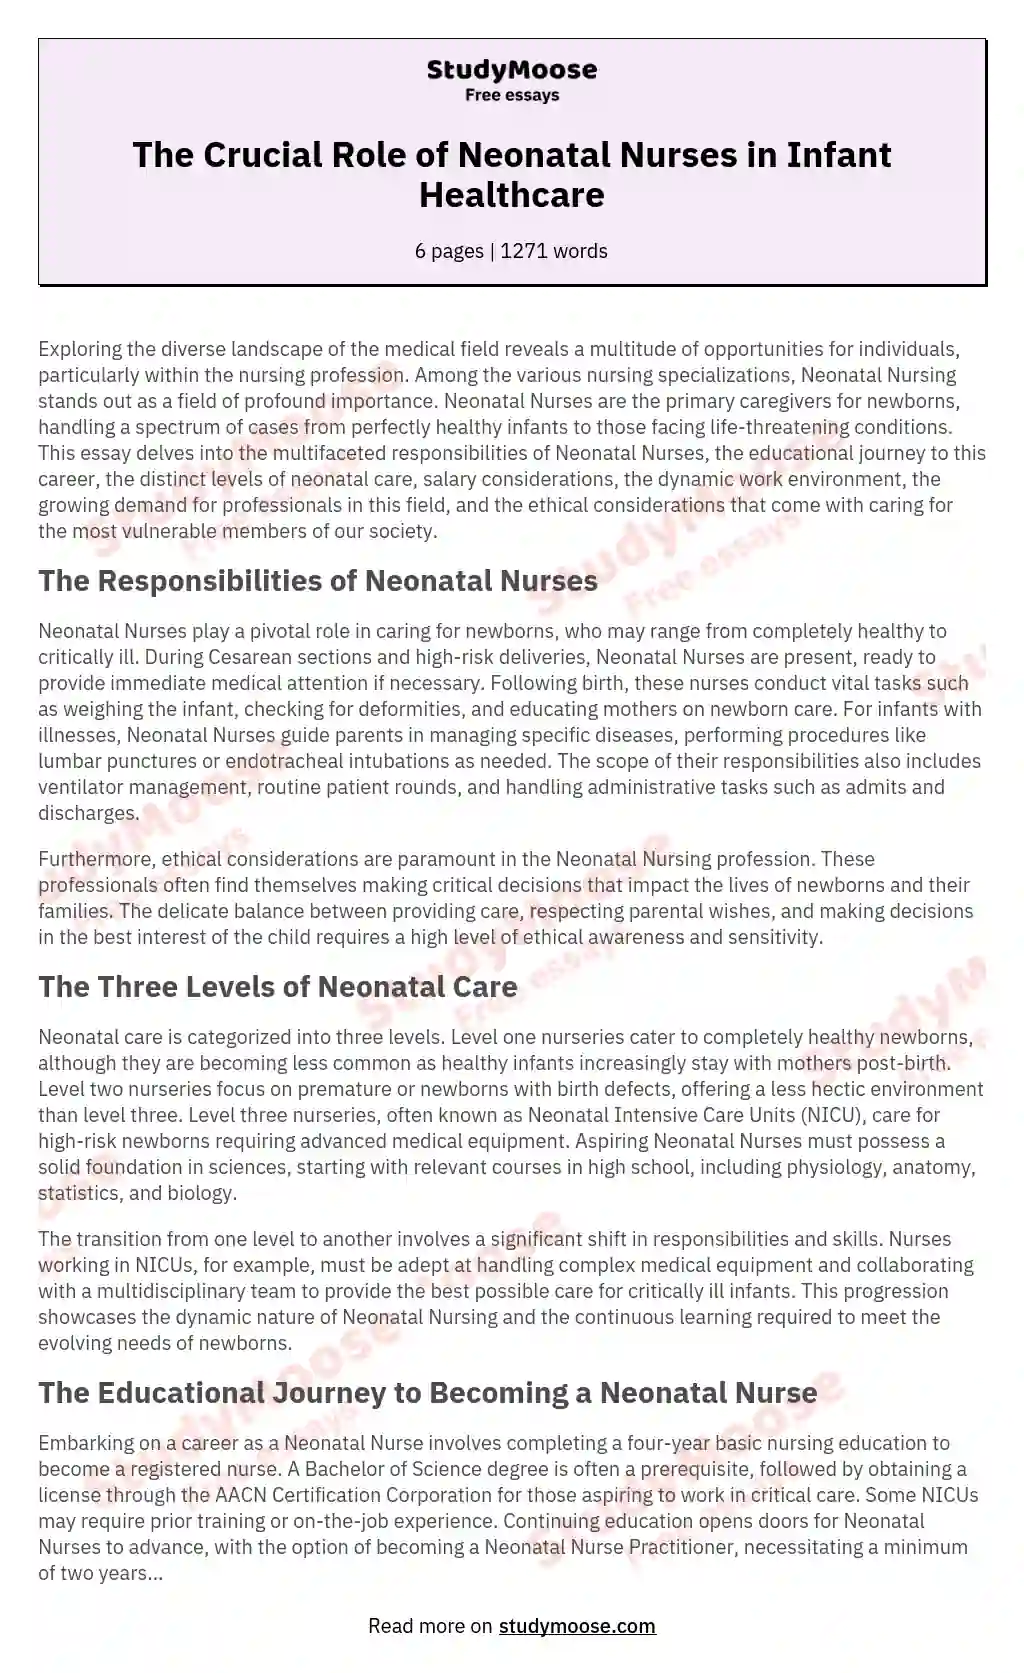 The Crucial Role of Neonatal Nurses in Infant Healthcare essay